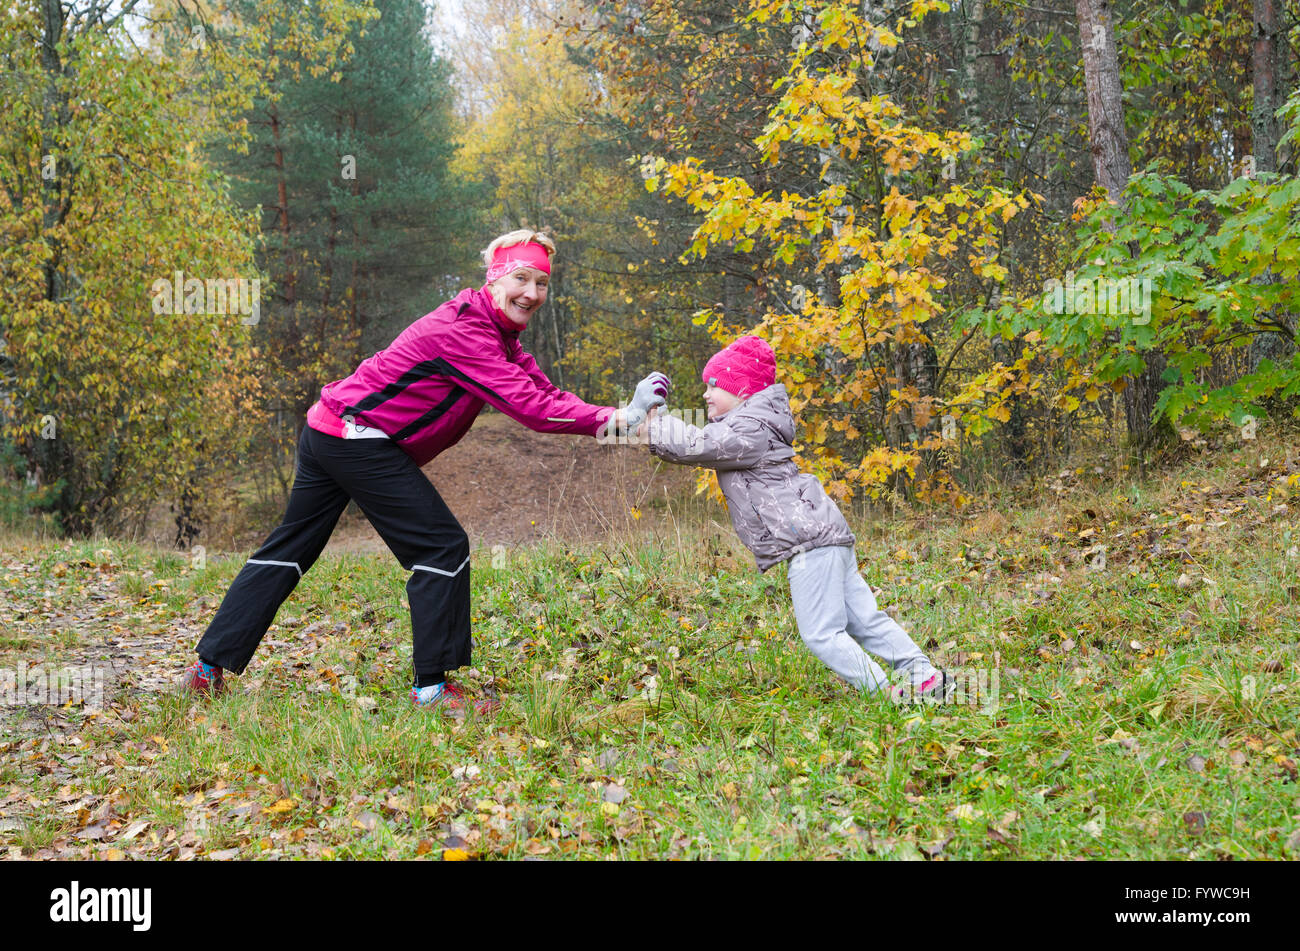 Woman with girl doing aerobics in the park Stock Photo